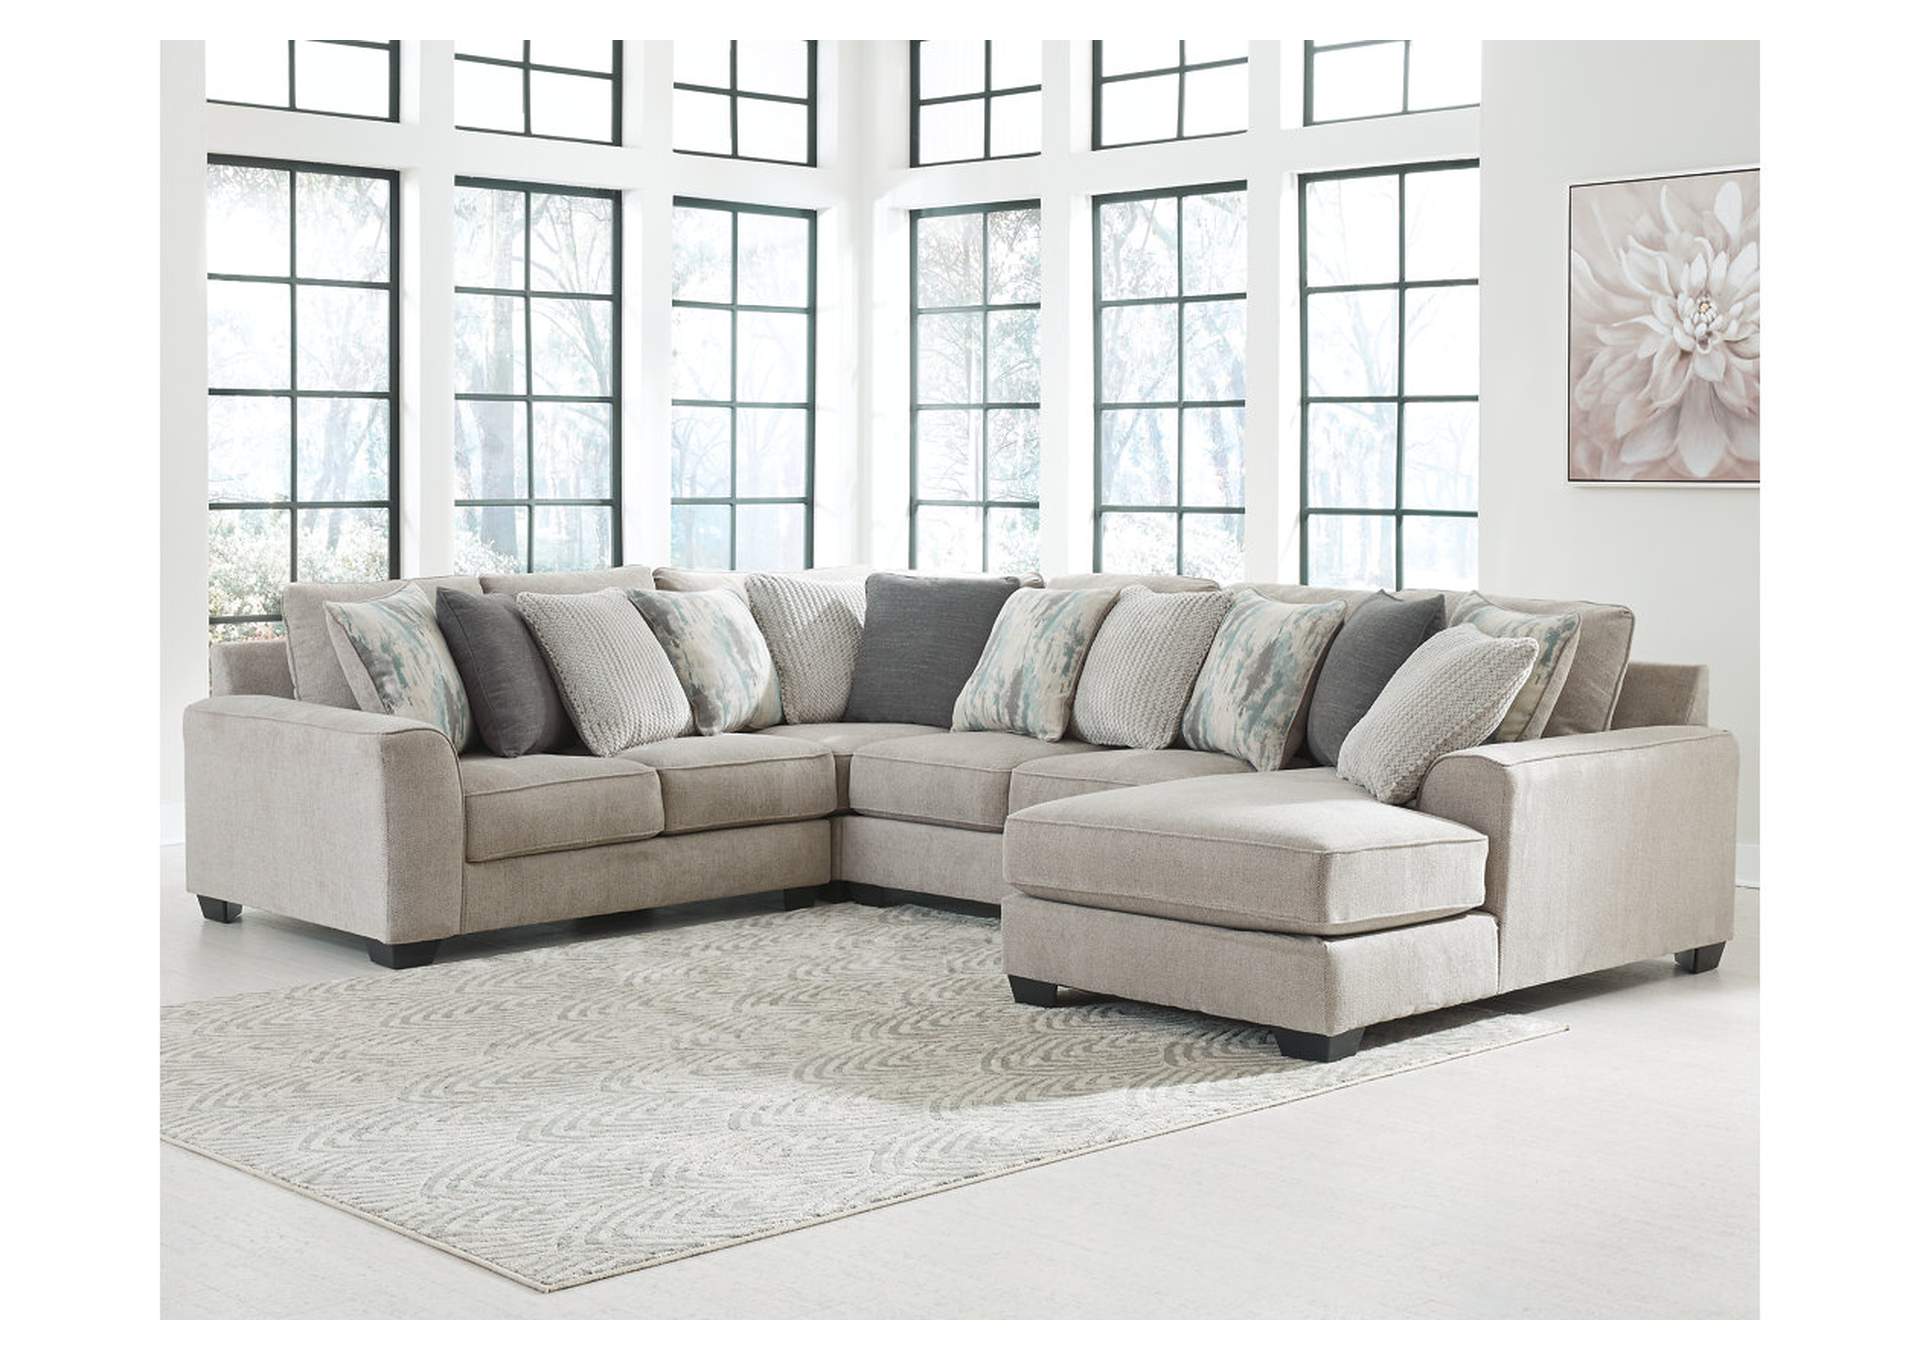 Ardsley 4-Piece Sectional with Ottoman,Benchcraft